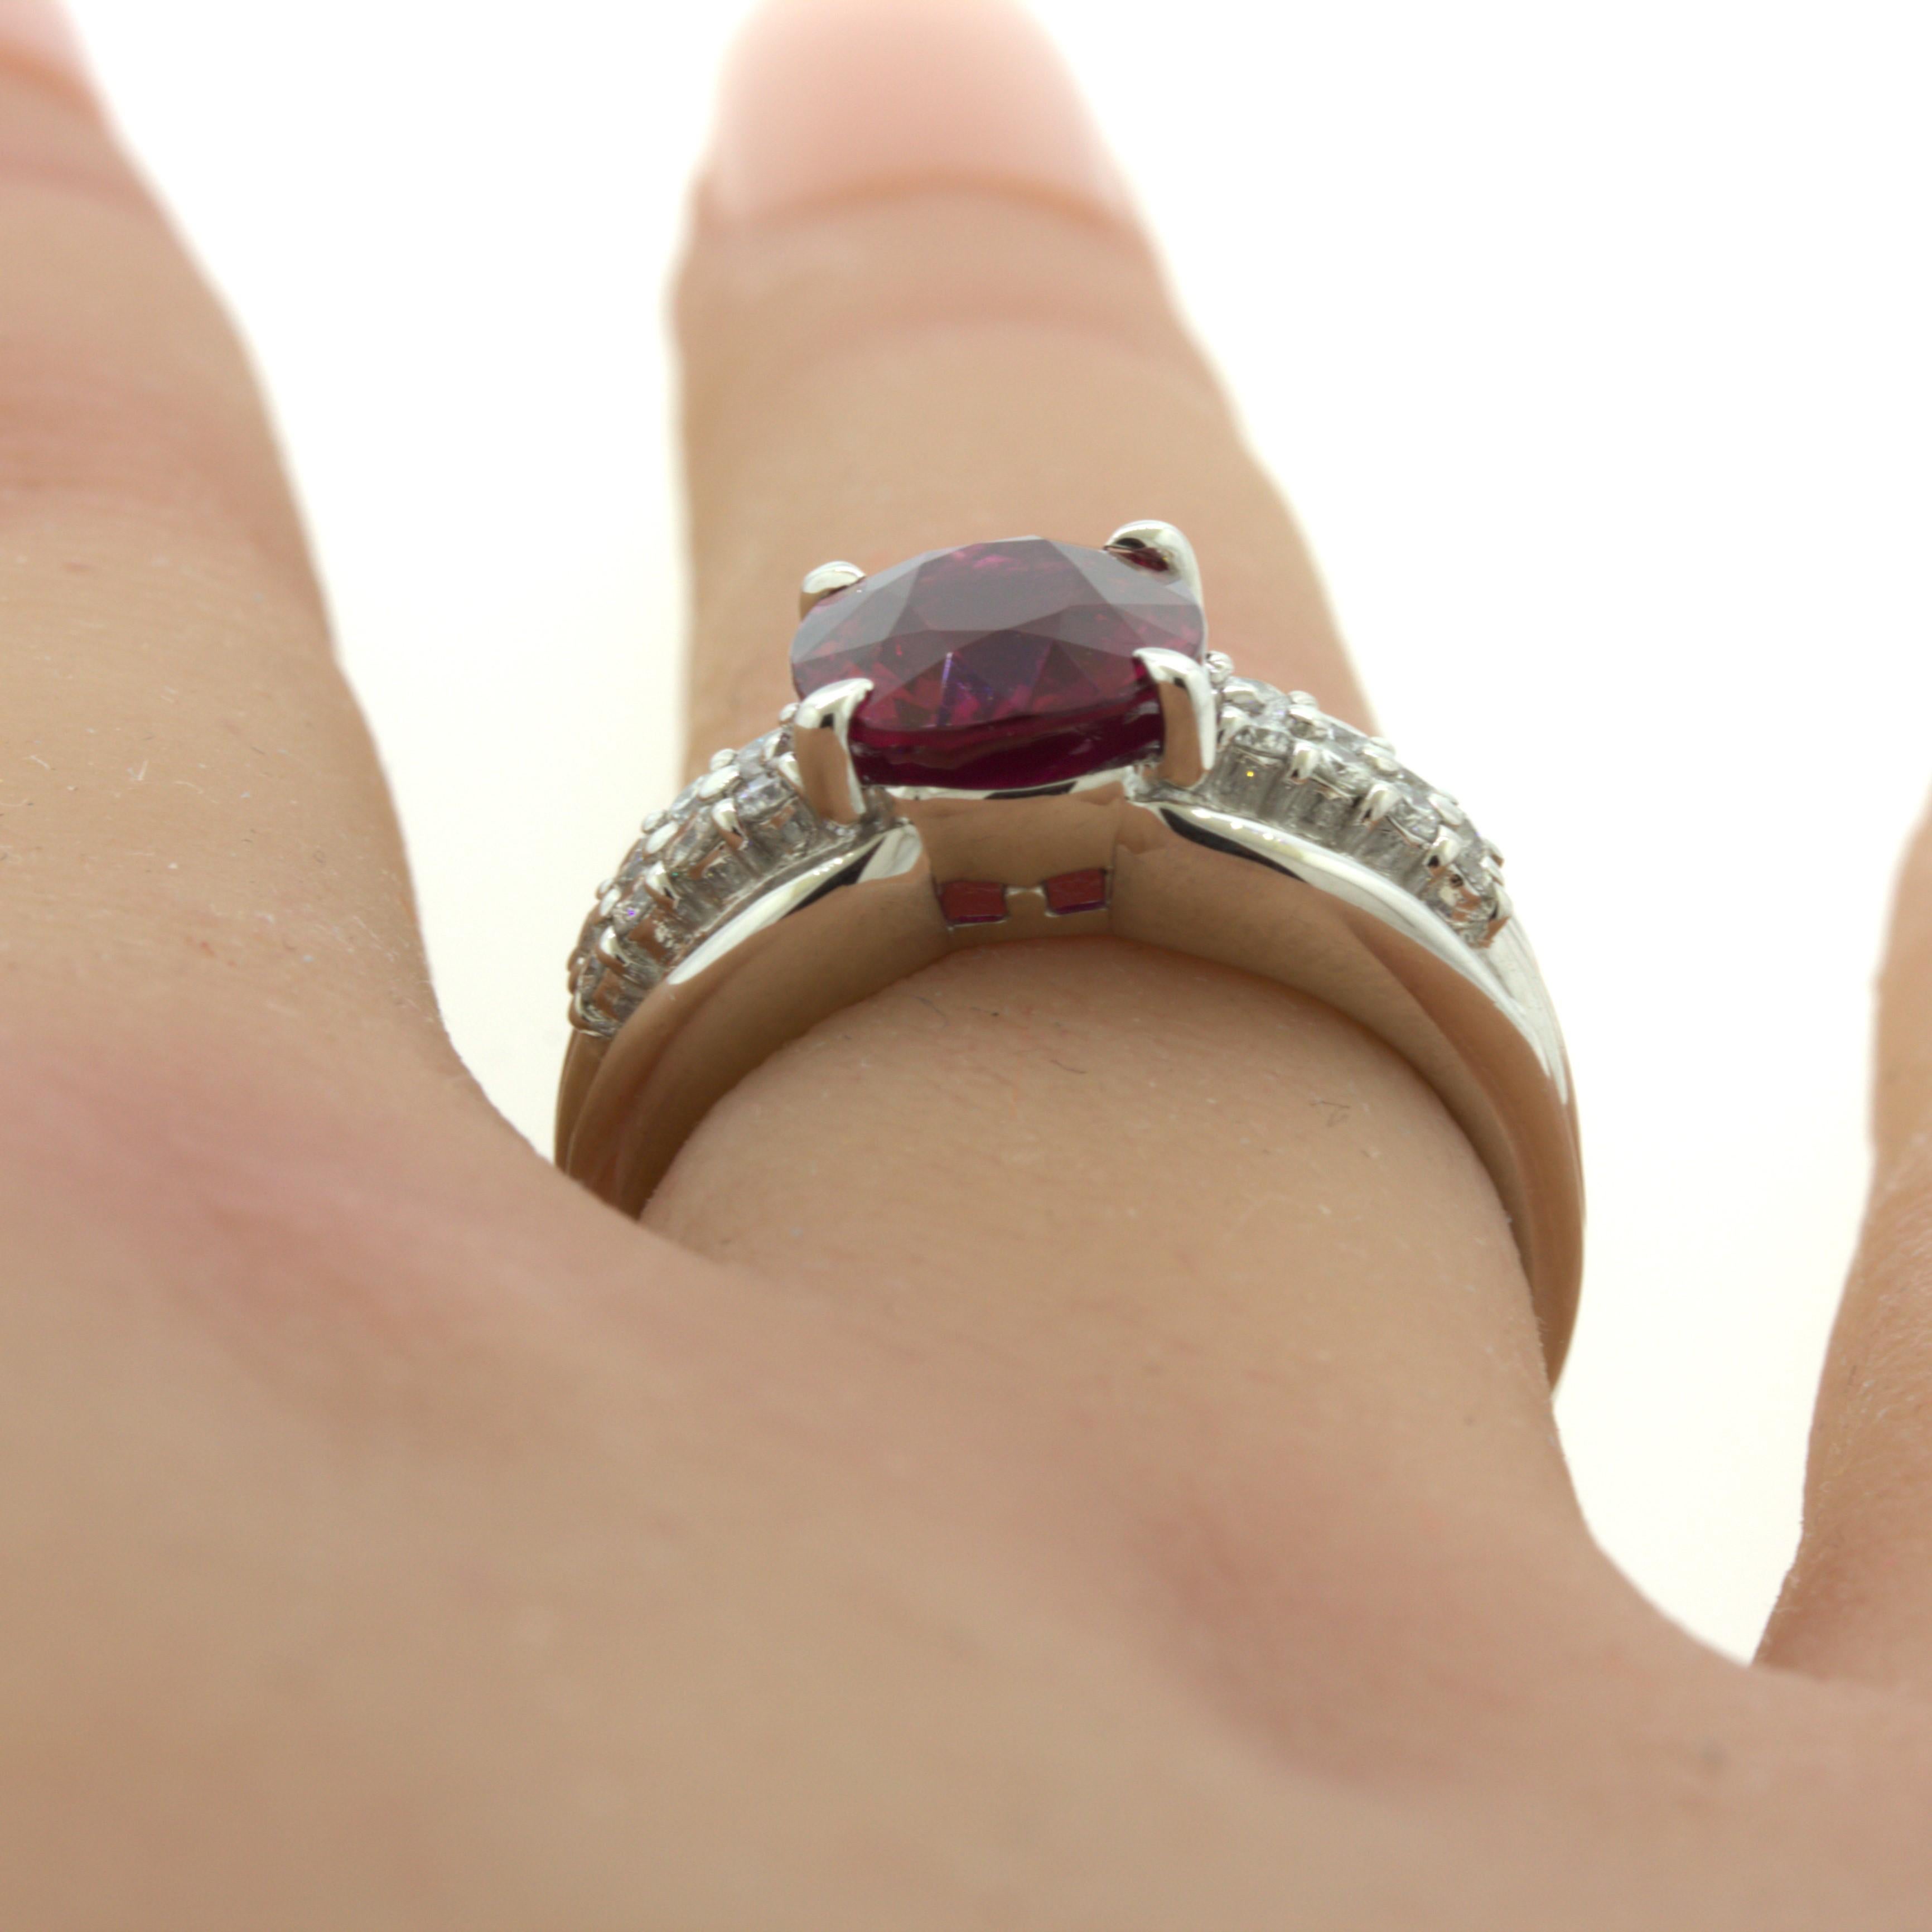 4.05 Carat Ruby Diamond Platinum Ring, GIA Certified For Sale 1